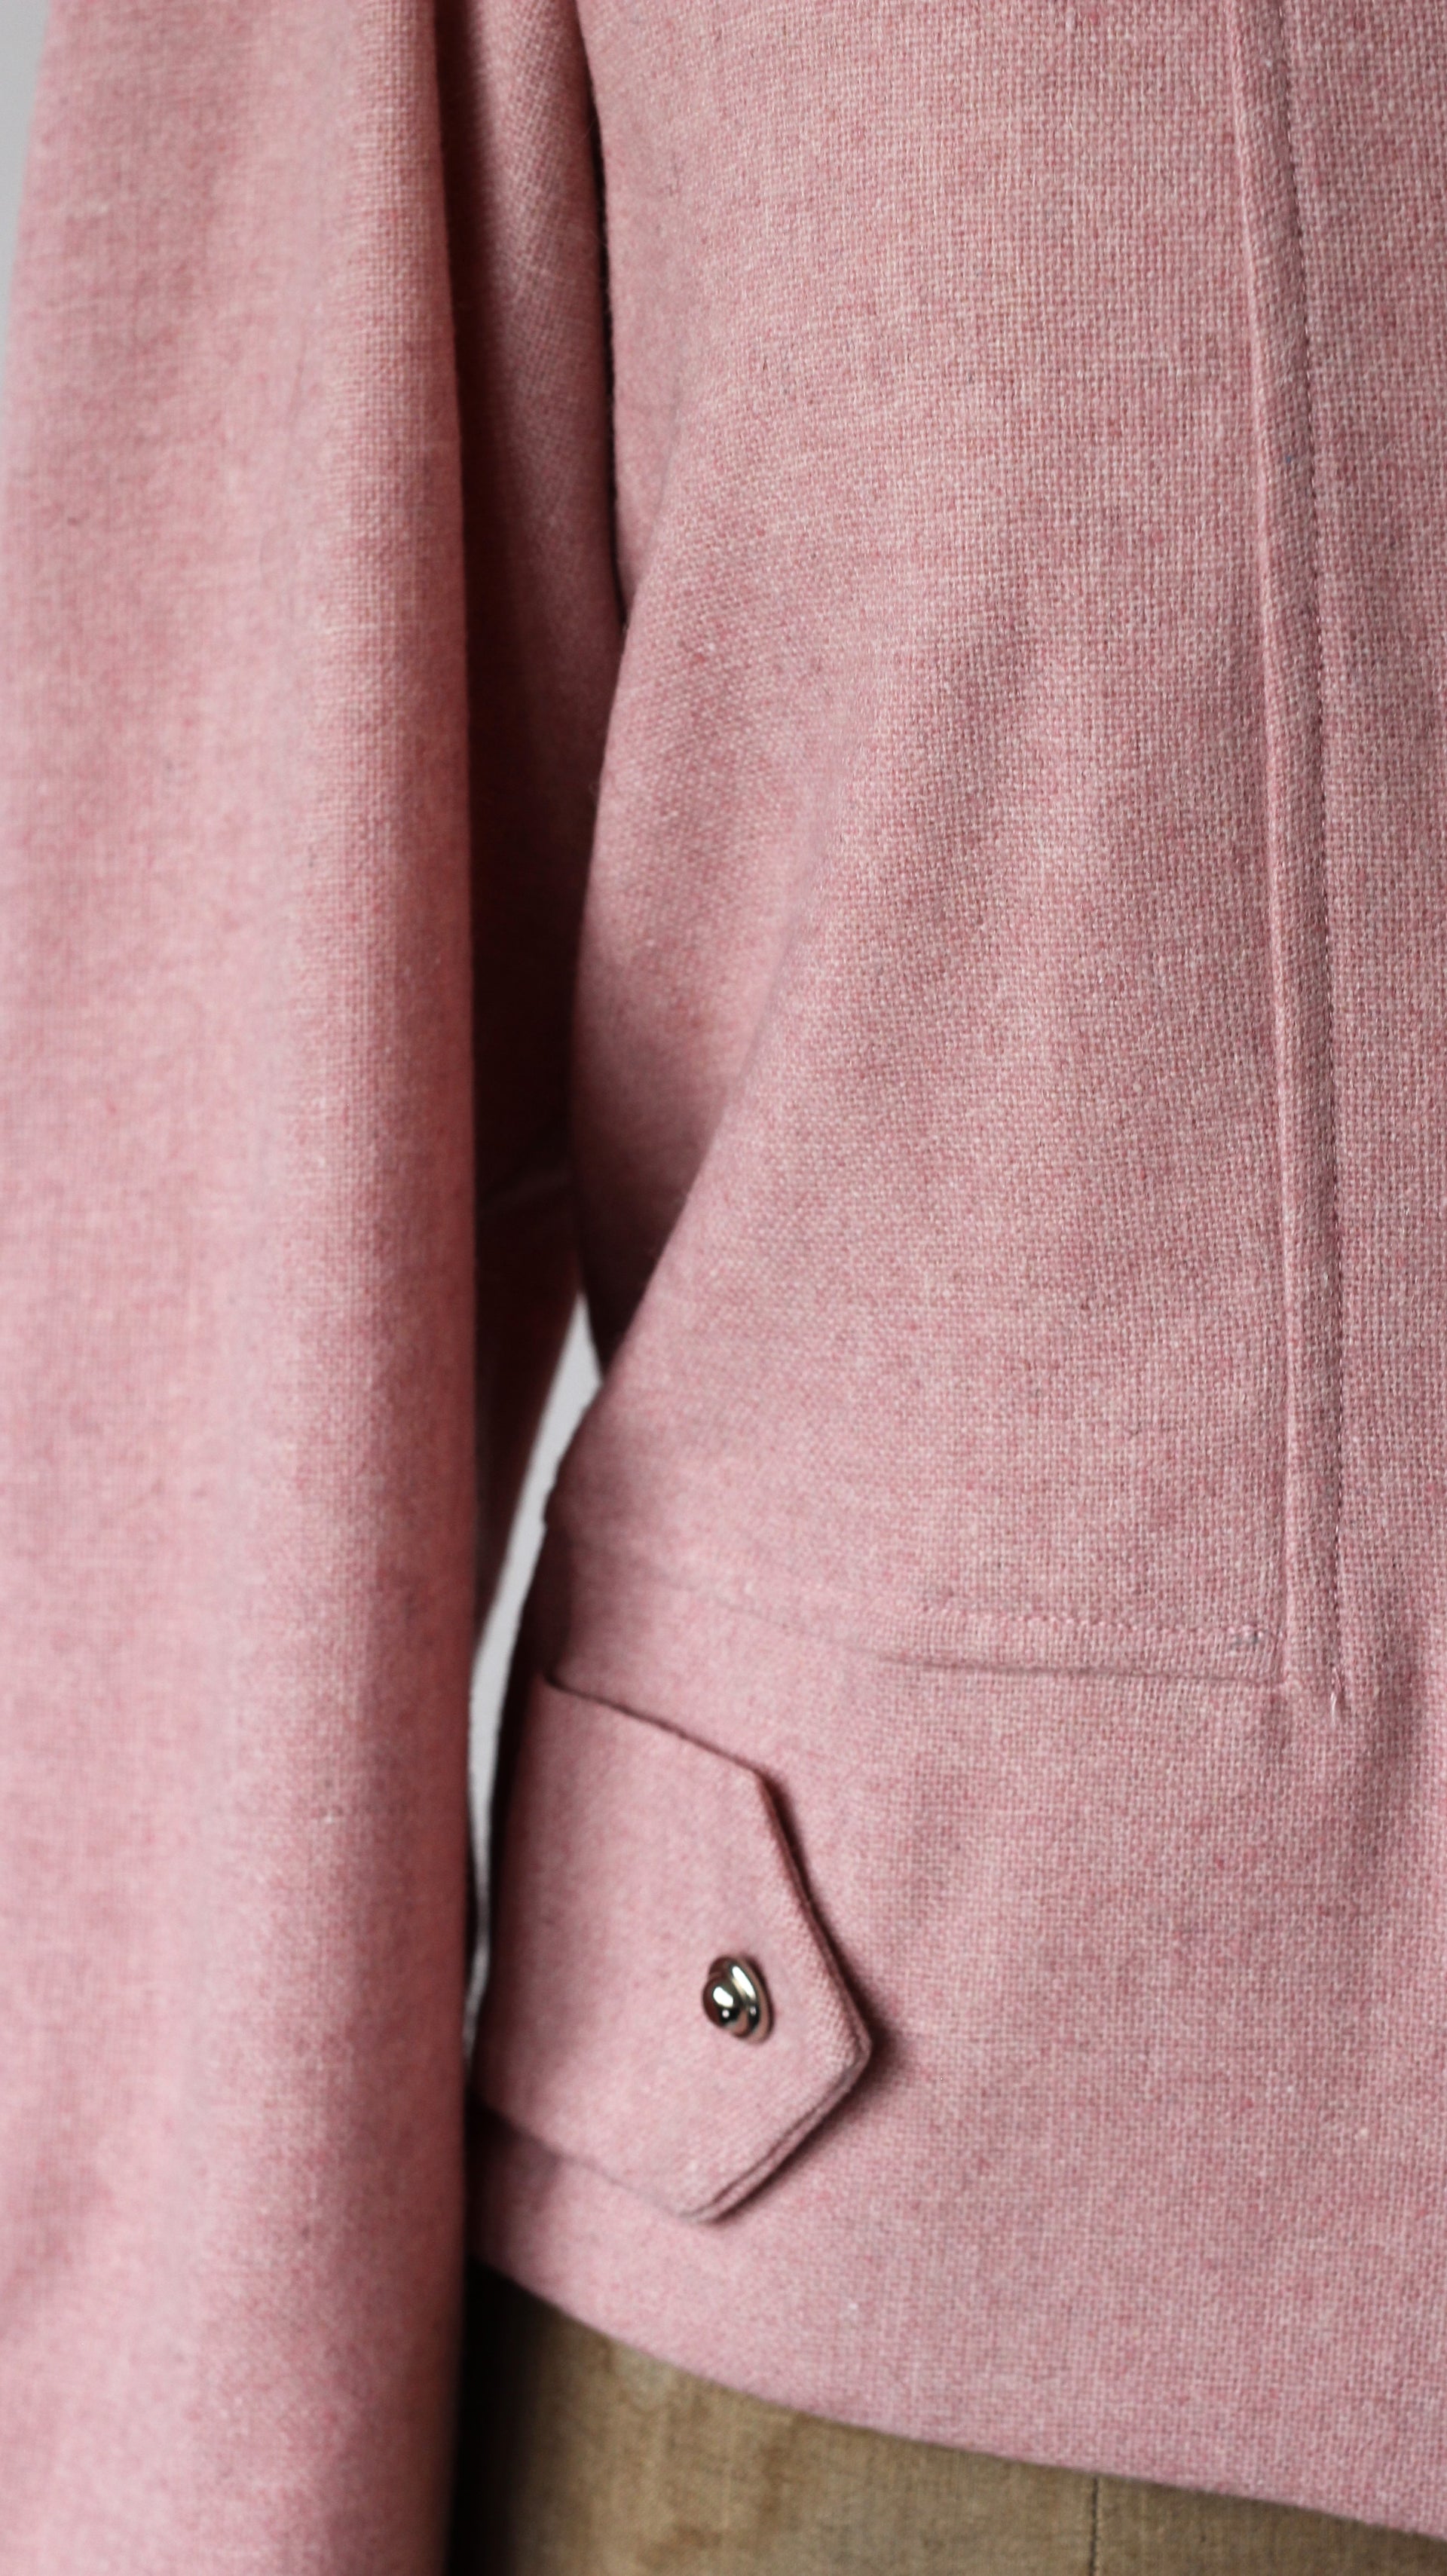 1960/70s Pink Wool Jacket with Silver Buttons